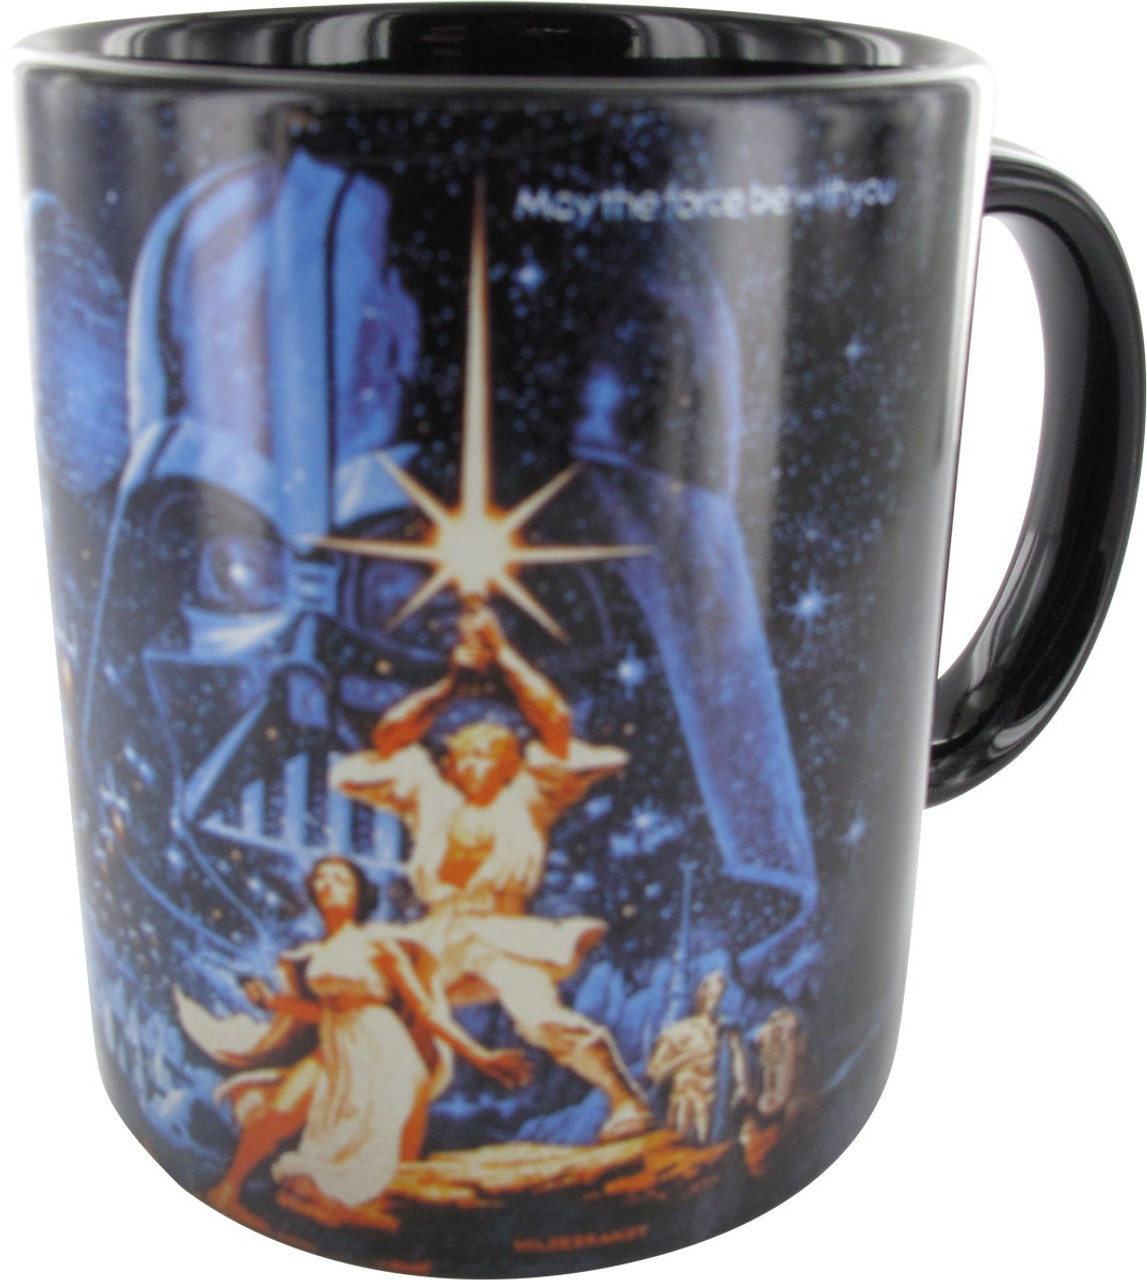 https://cdn11.bigcommerce.com/s-kjvm95bh8i/images/stencil/1280x1280/products/68019/105895/star-wars-force-be-with-you-poster-mug-5__82958.1512282362.jpg?c=2